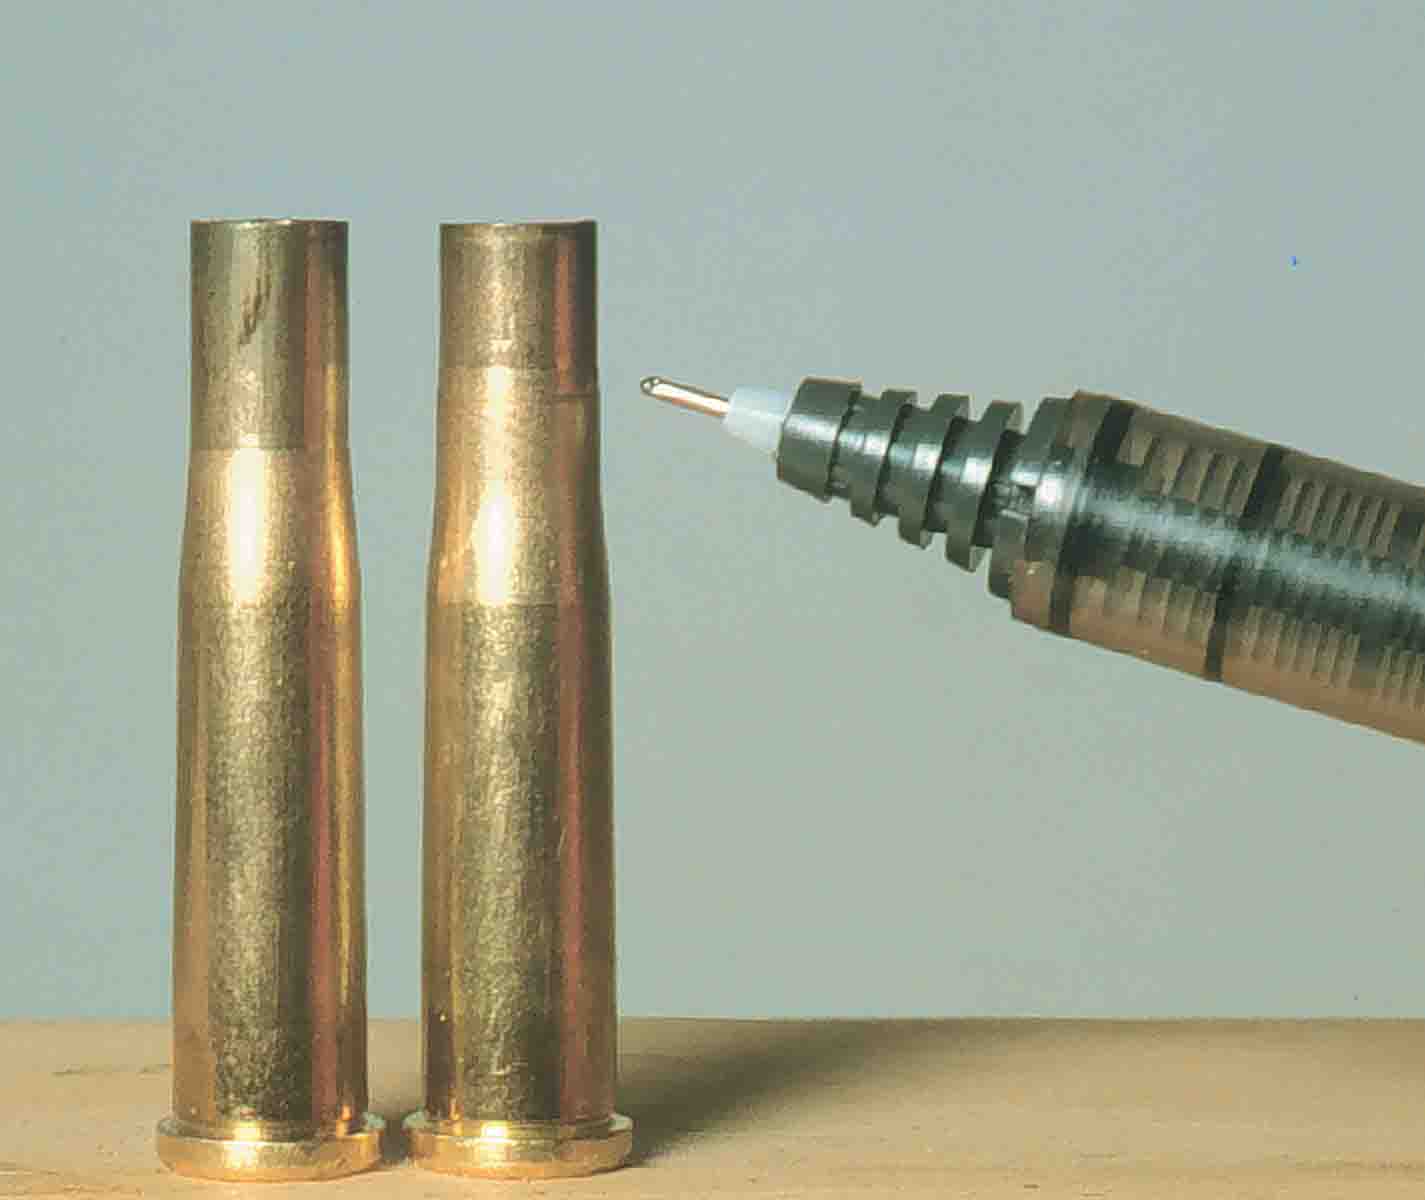 The neck-sized case (right) uses the expanded neck portion to positively center the rounds in the chamber.